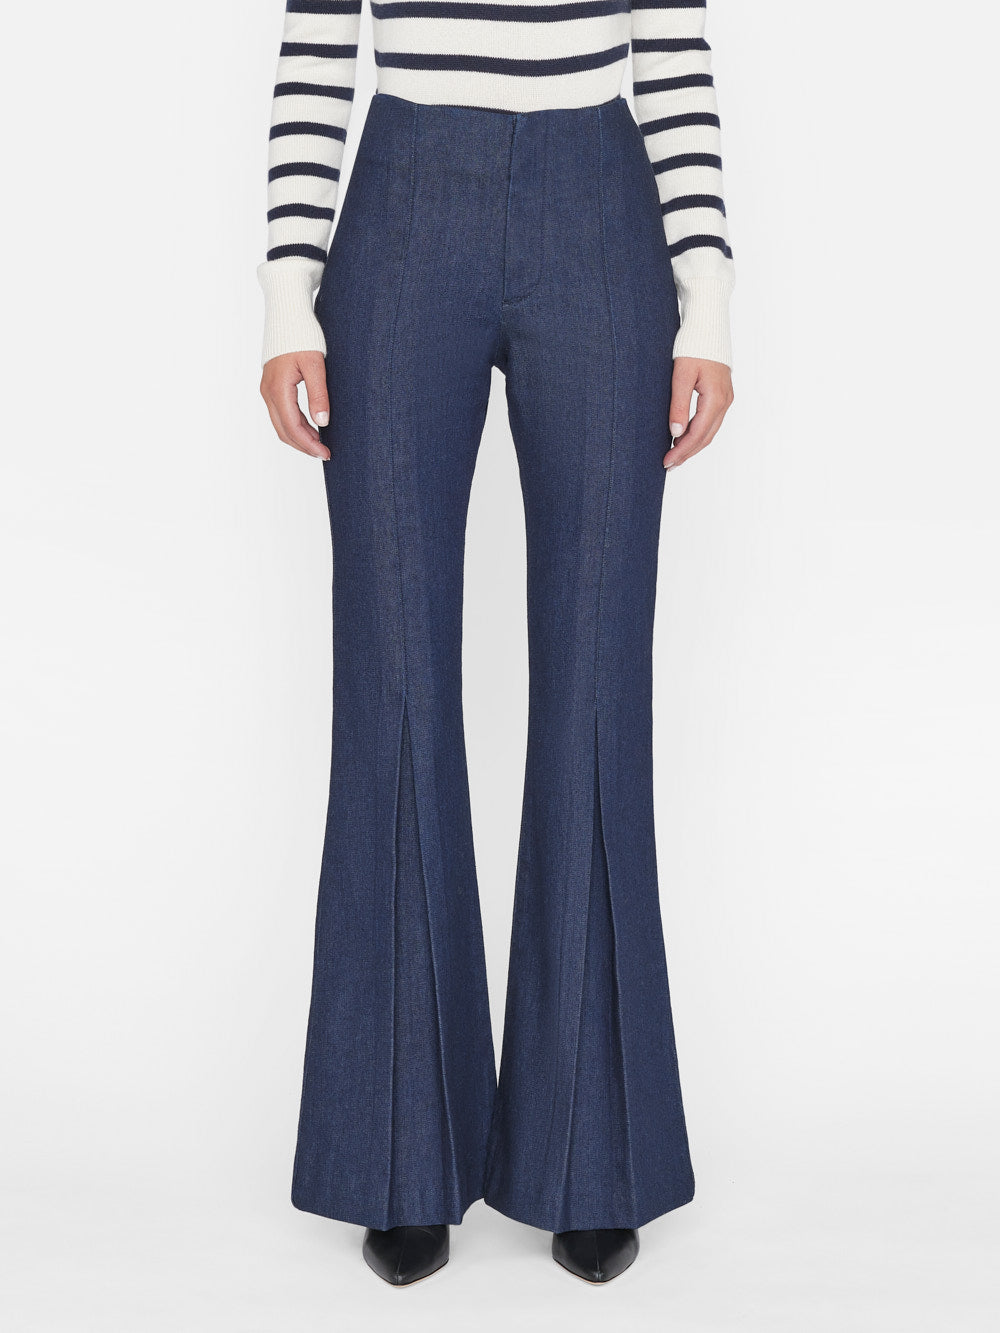 Pleated Denim Pant by Frame